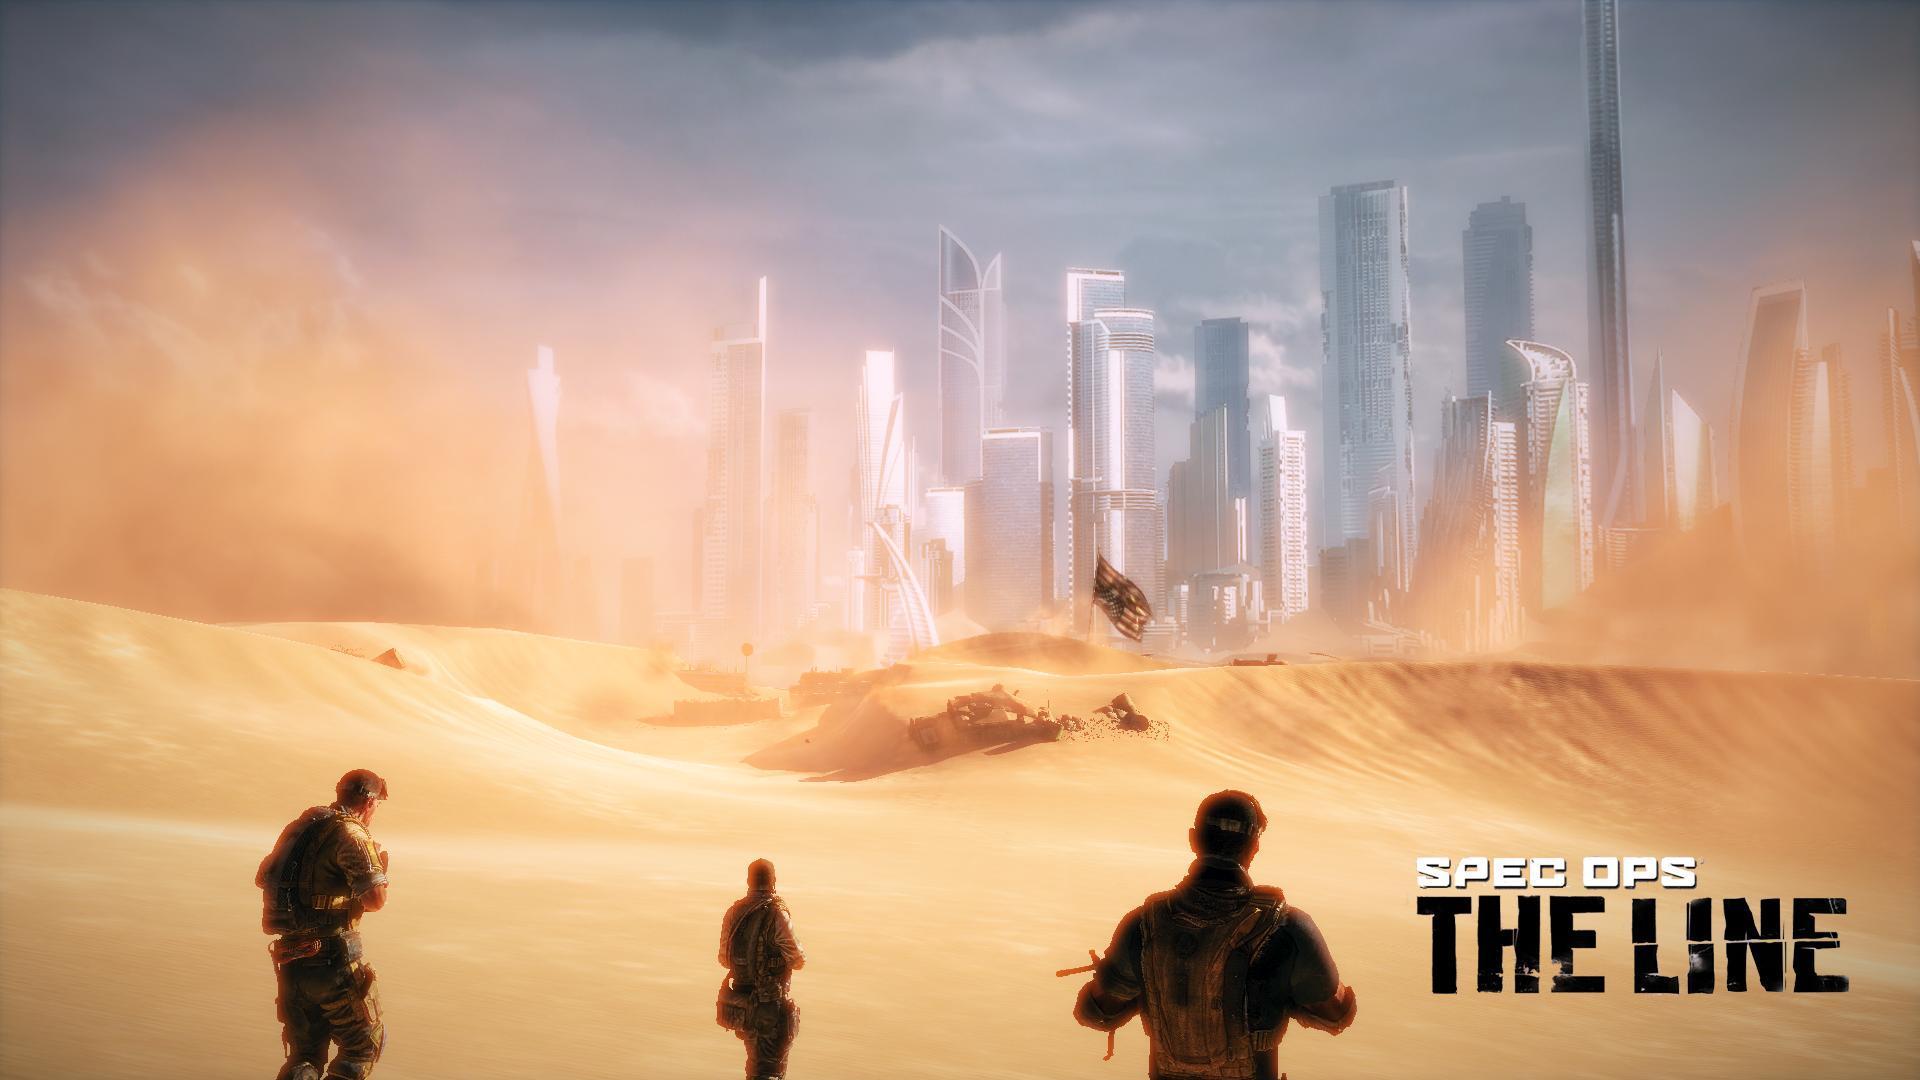 Spec Ops: The Line Wallpaper. Spec Ops: The Line Background